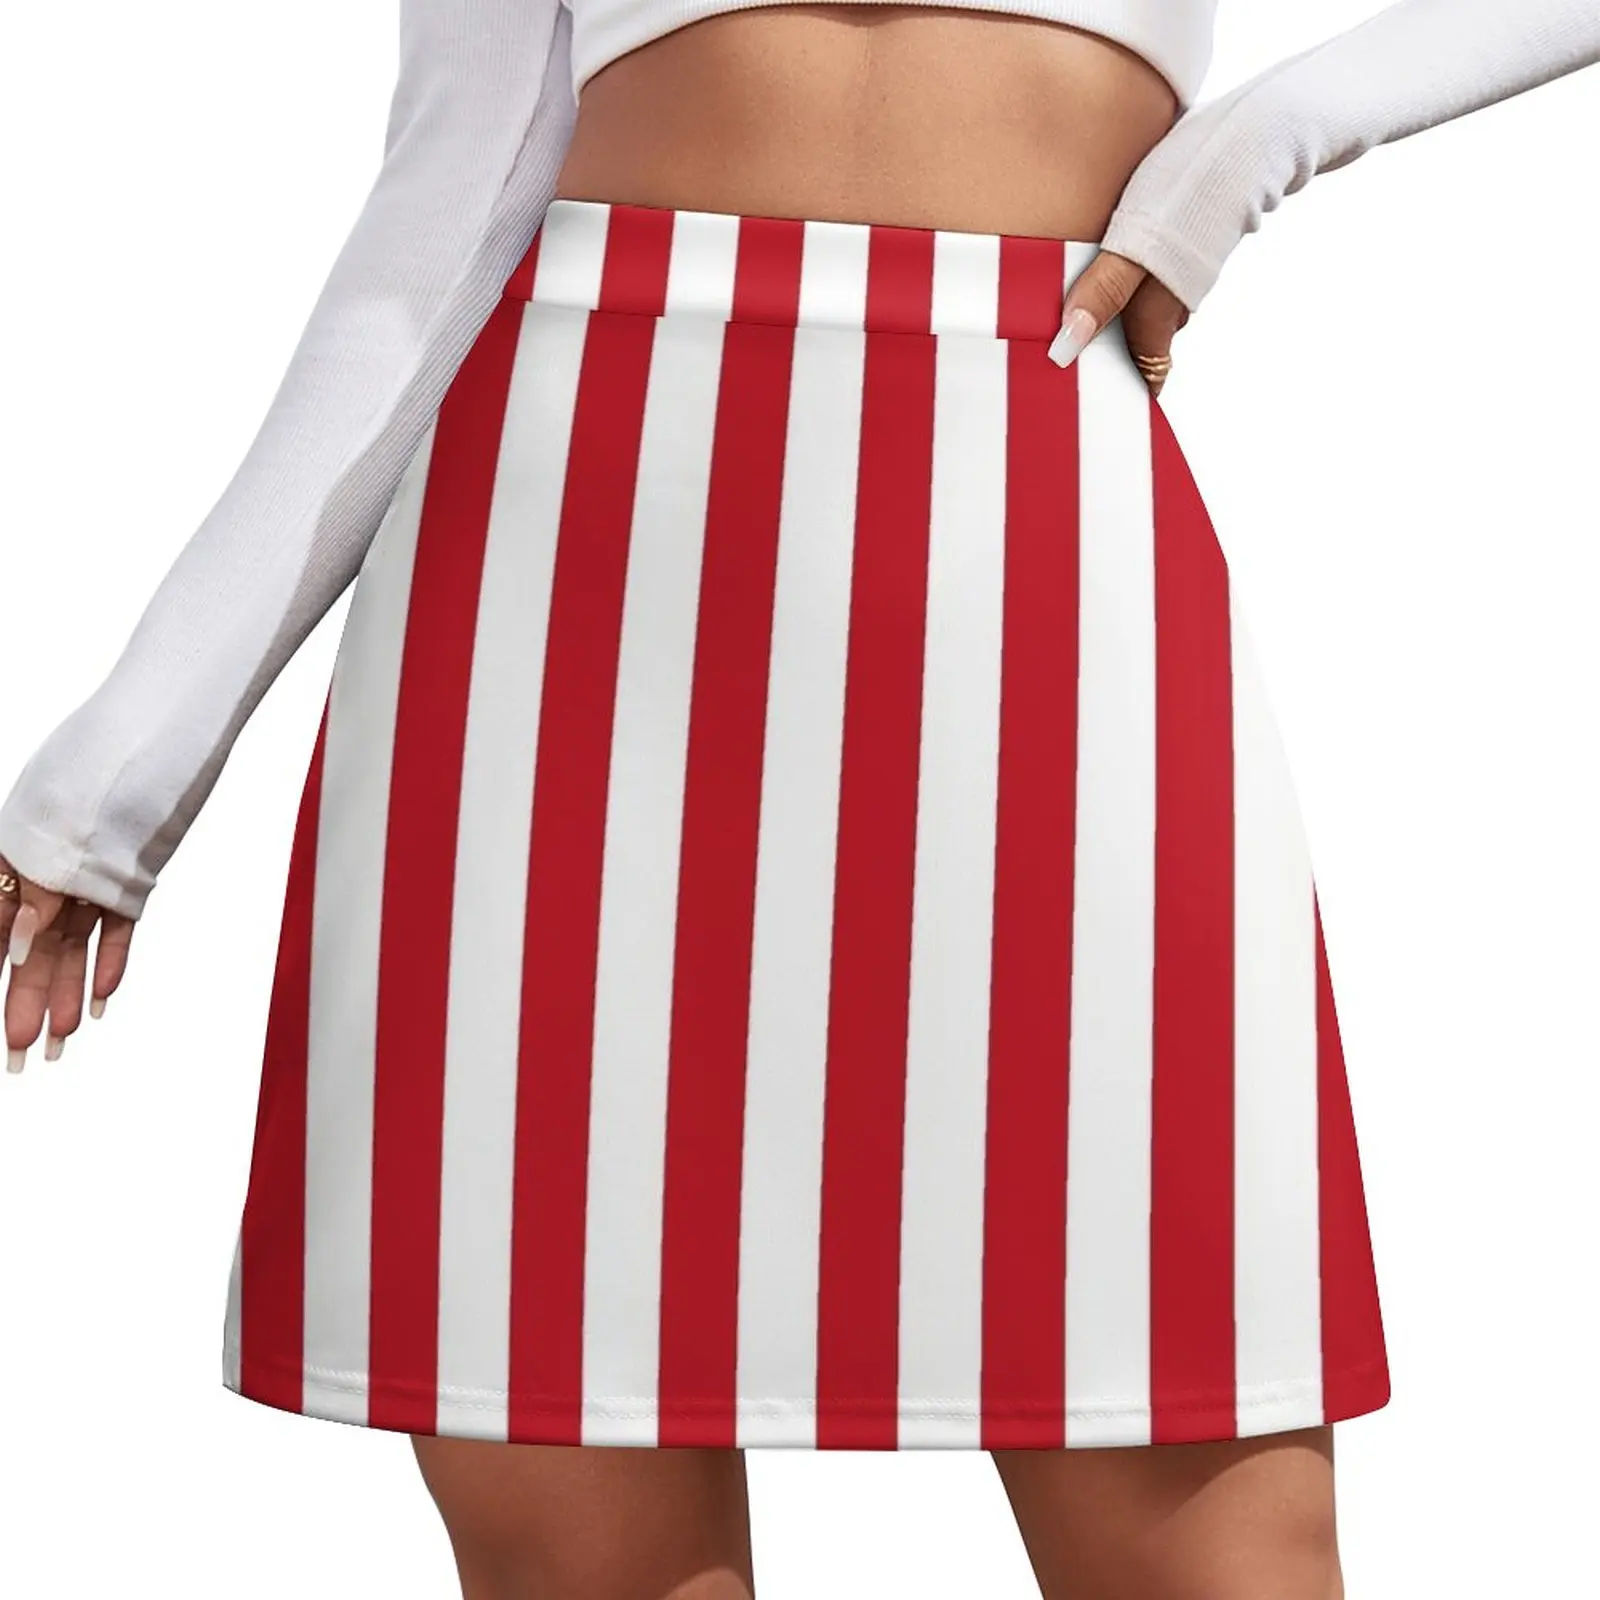 

Red and White Stripes | Stripe Patterns | Striped Patterns | Wide Stripes | Vertical Stripes | Mini Skirt